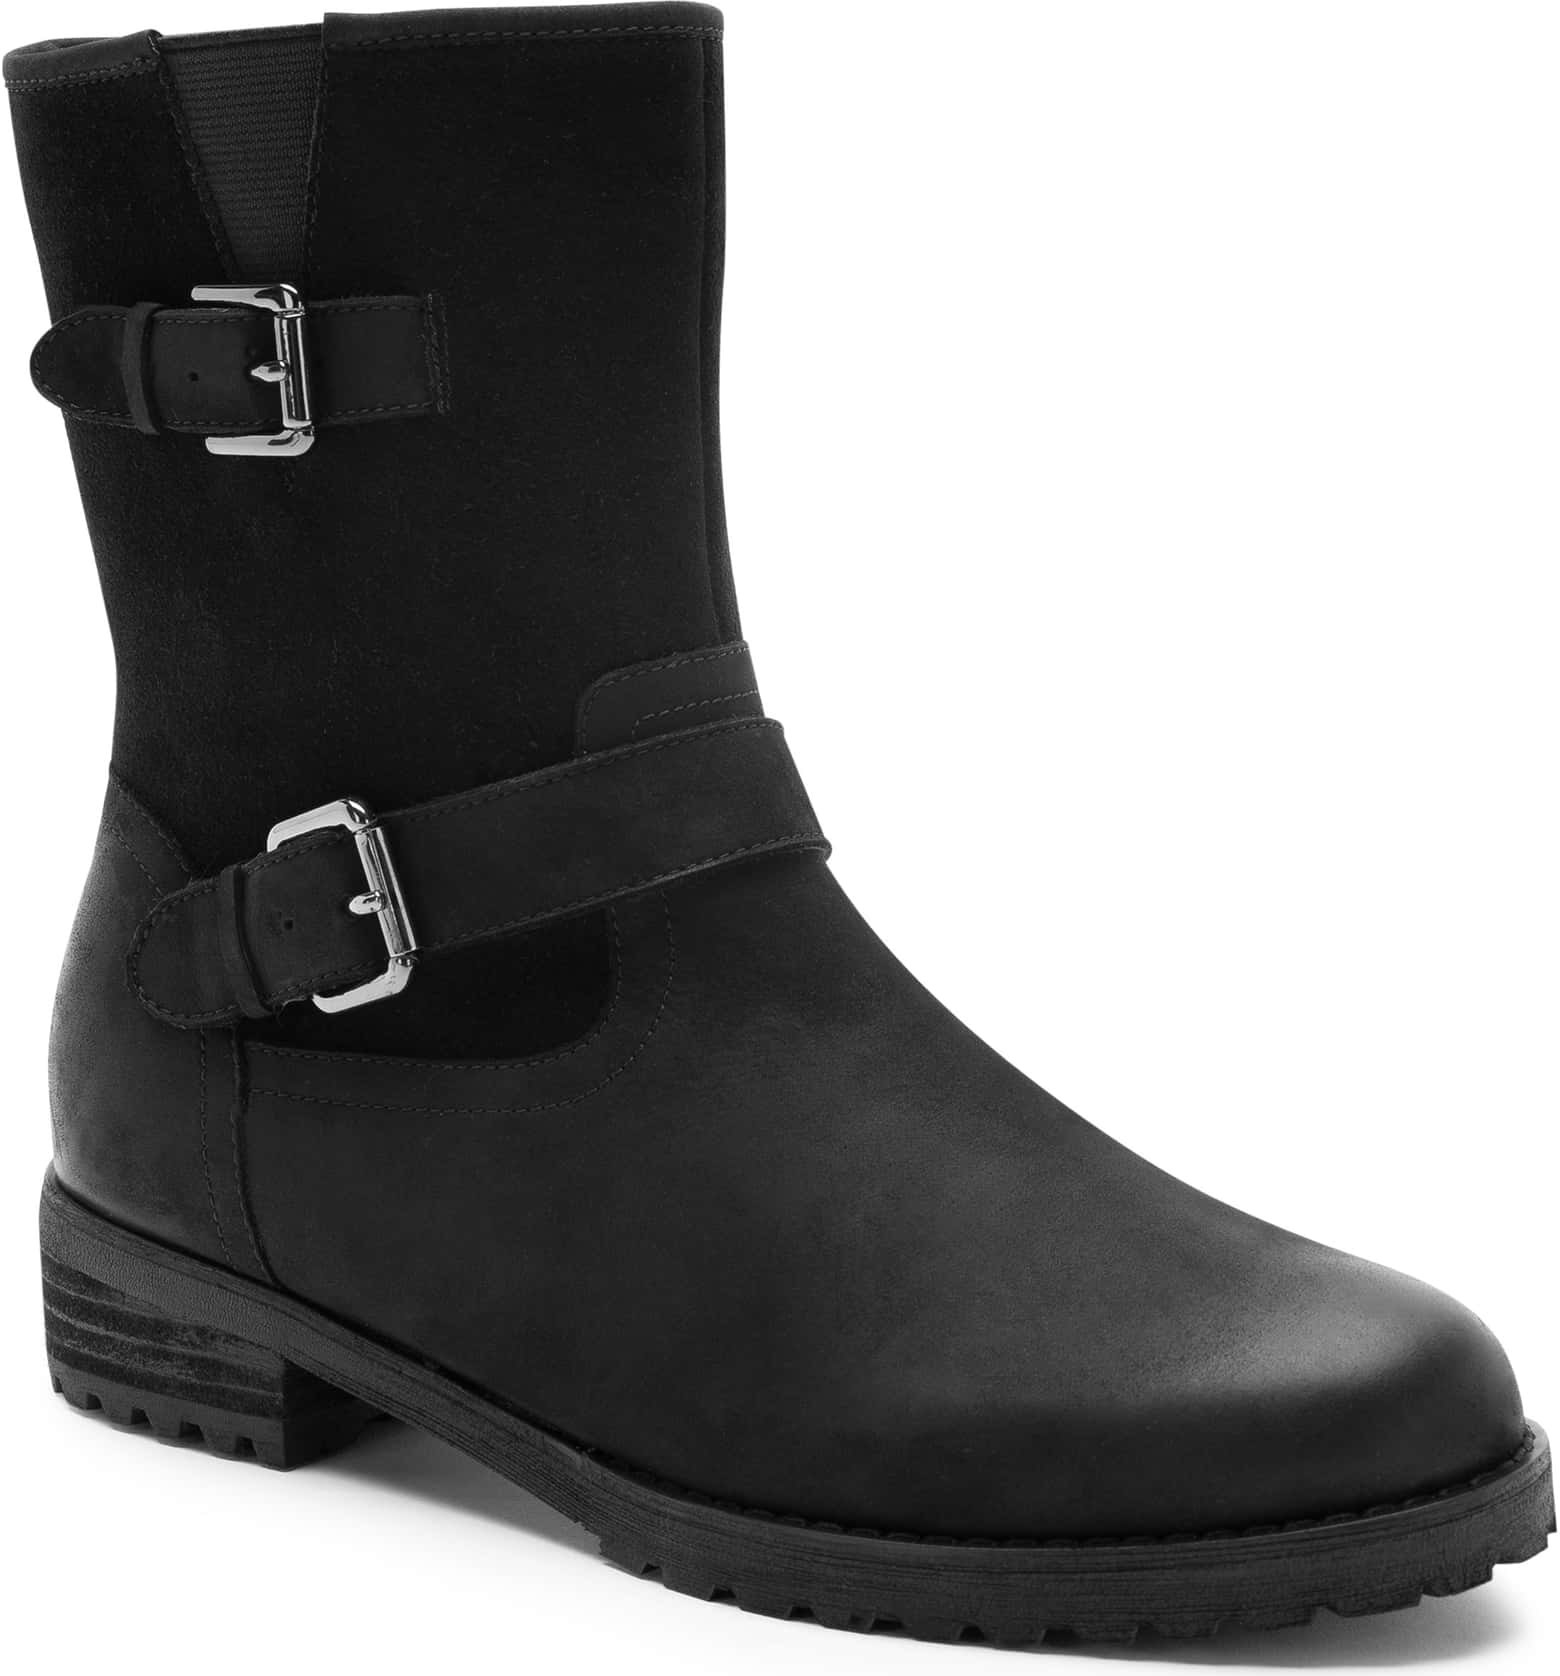 the black boot with buckle around the ankle